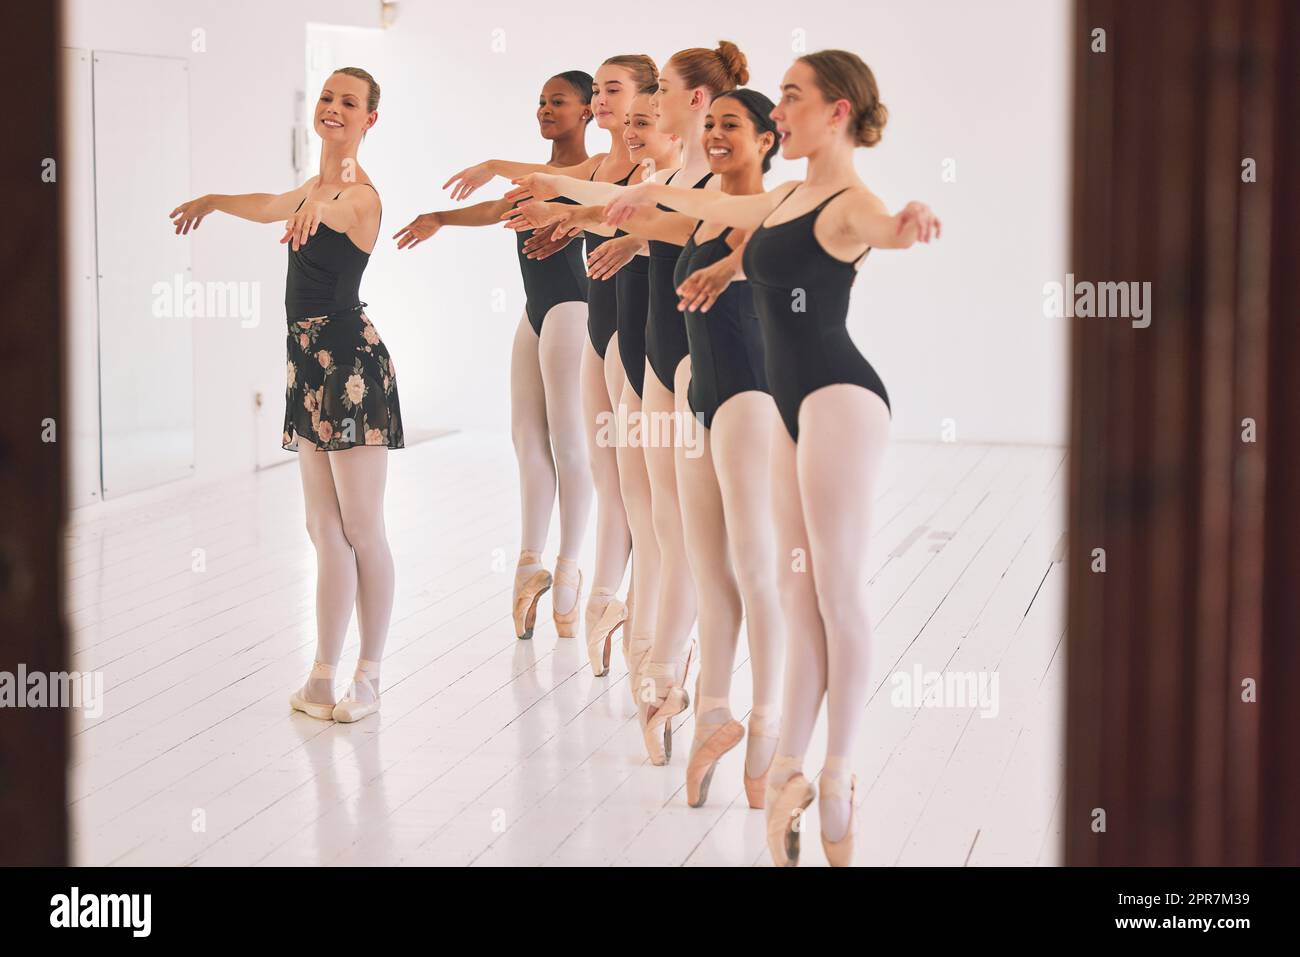 Young woman dance instructor teaching a ballet class to a group of a children in her studio. Ballerina teacher working with girl students, preparing for their recital, performance or upcoming show Stock Photo